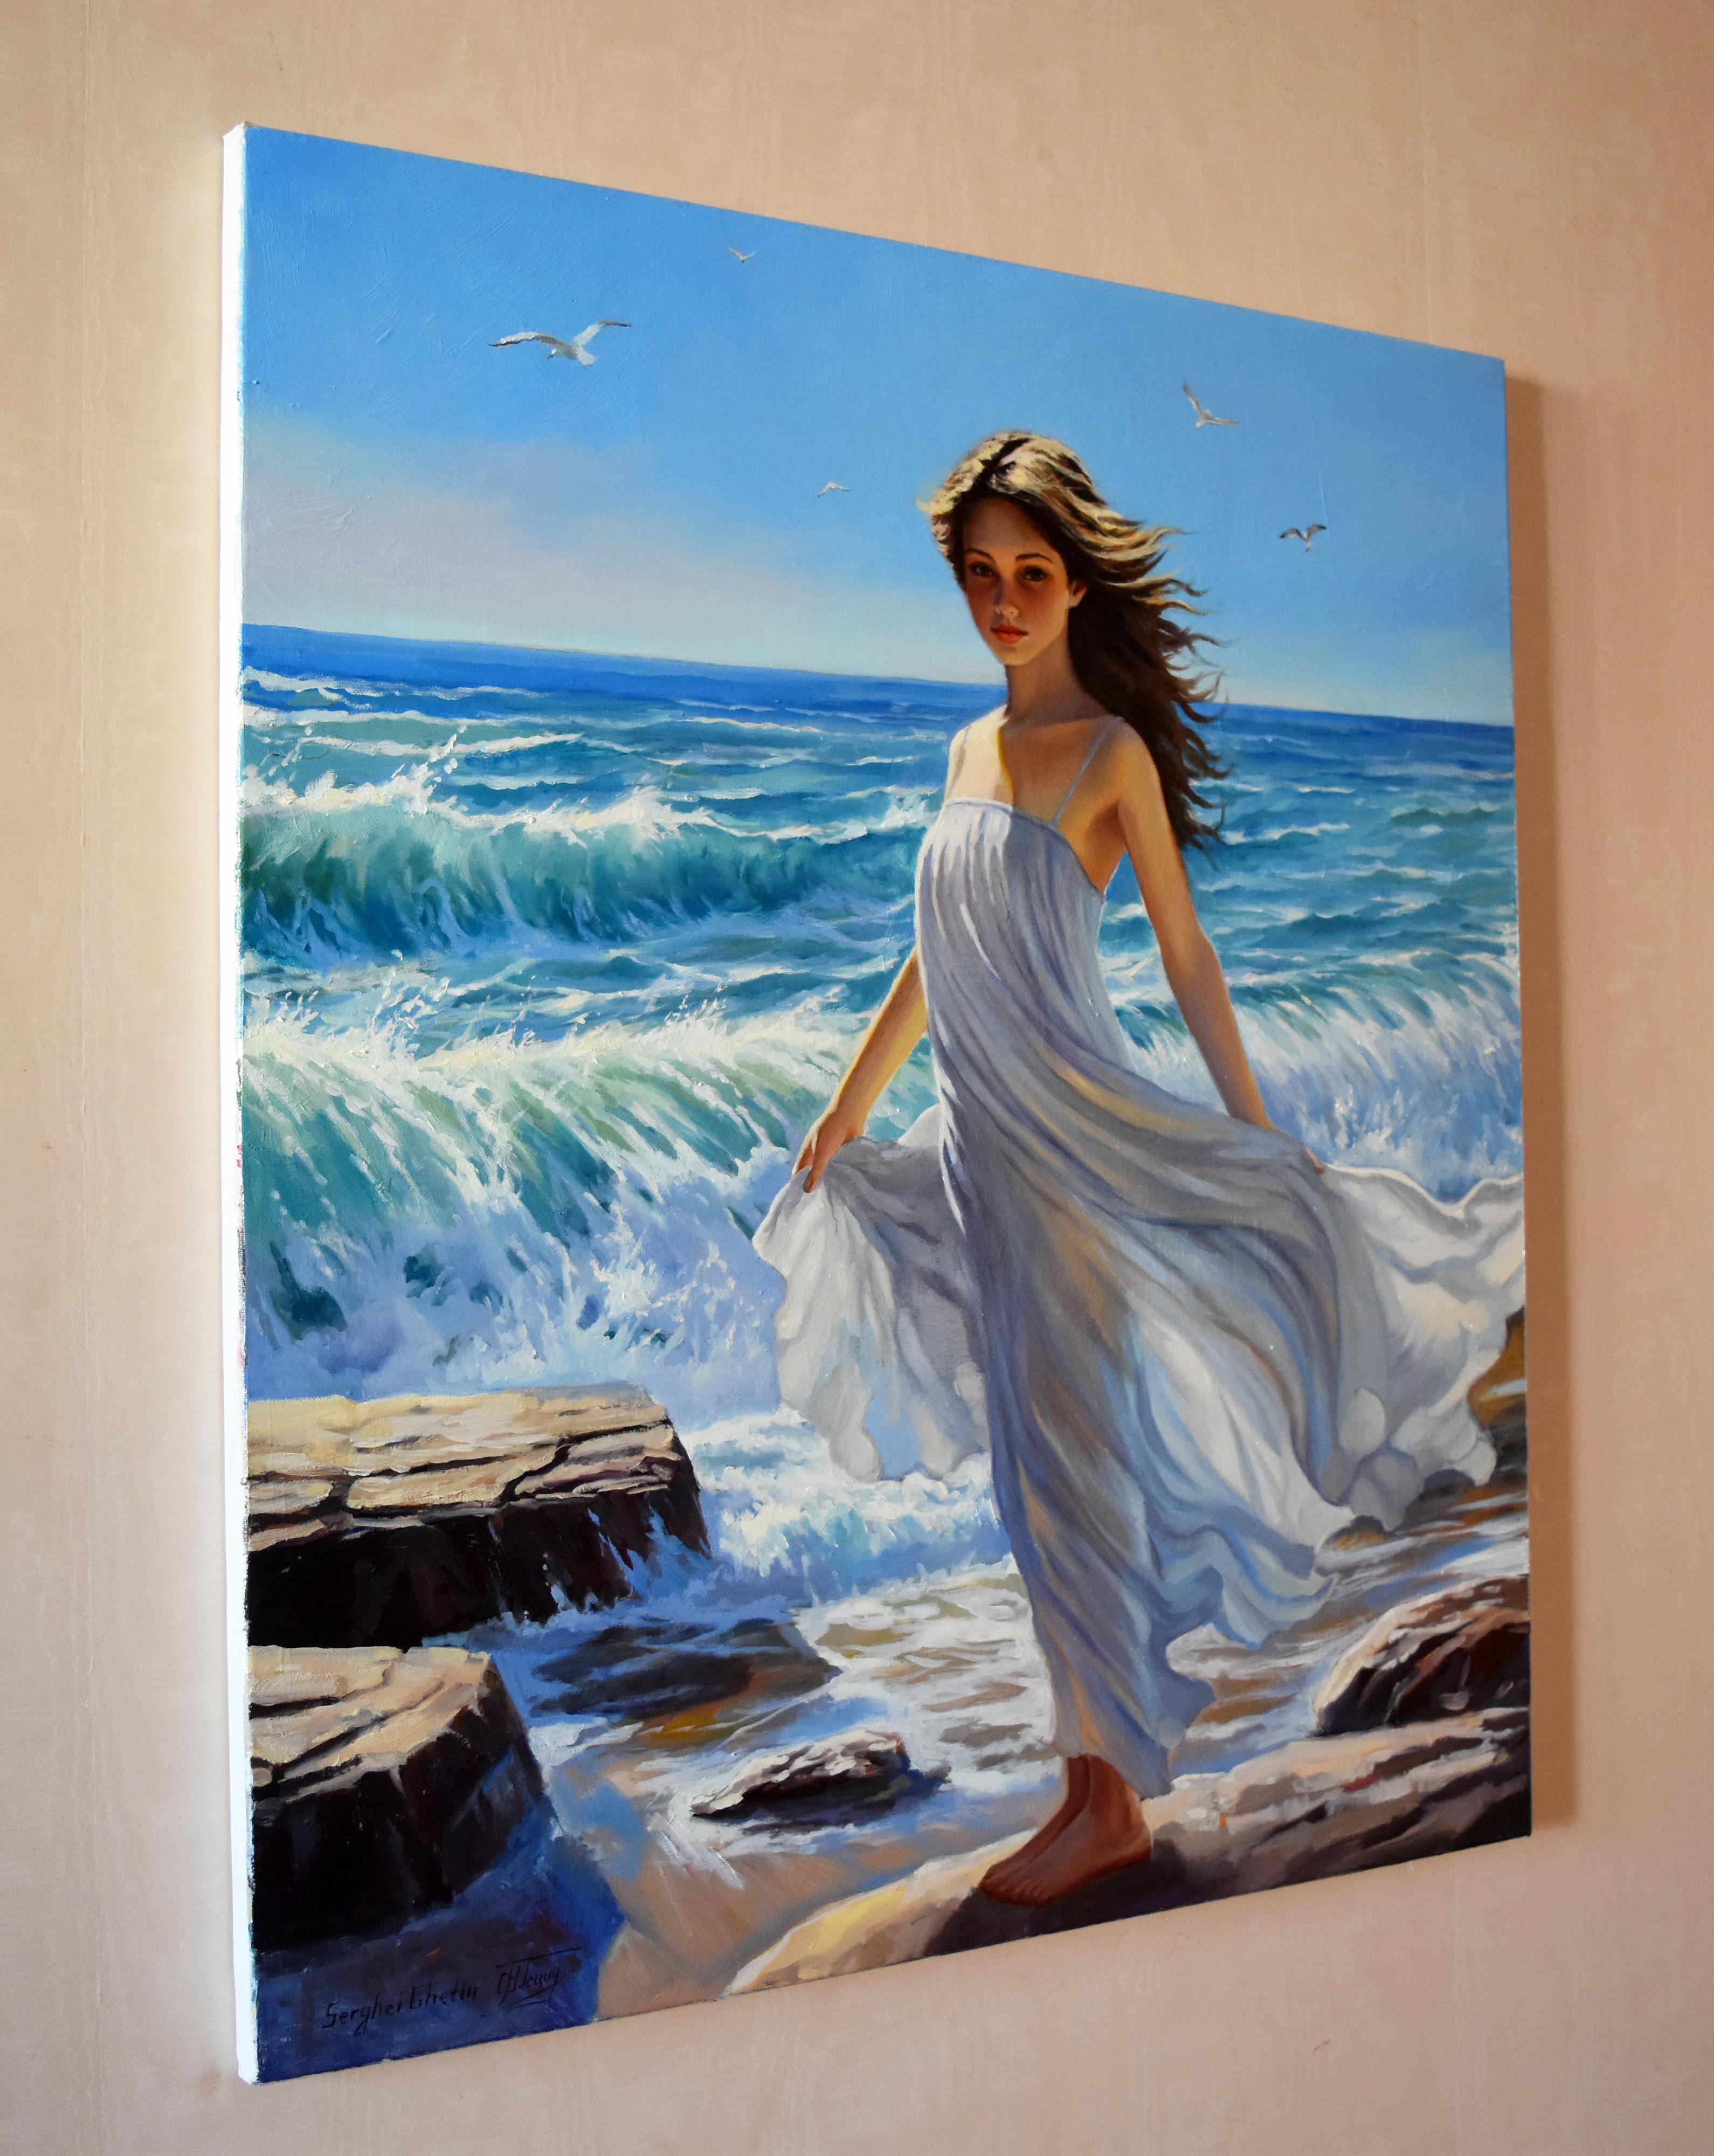 Sunny contrasting girl portrait at the sea coast. The waves crushing and the seagulls flying around. An artwork which brings summer and sea in to your home all year round. Professional paints on linen canvas.